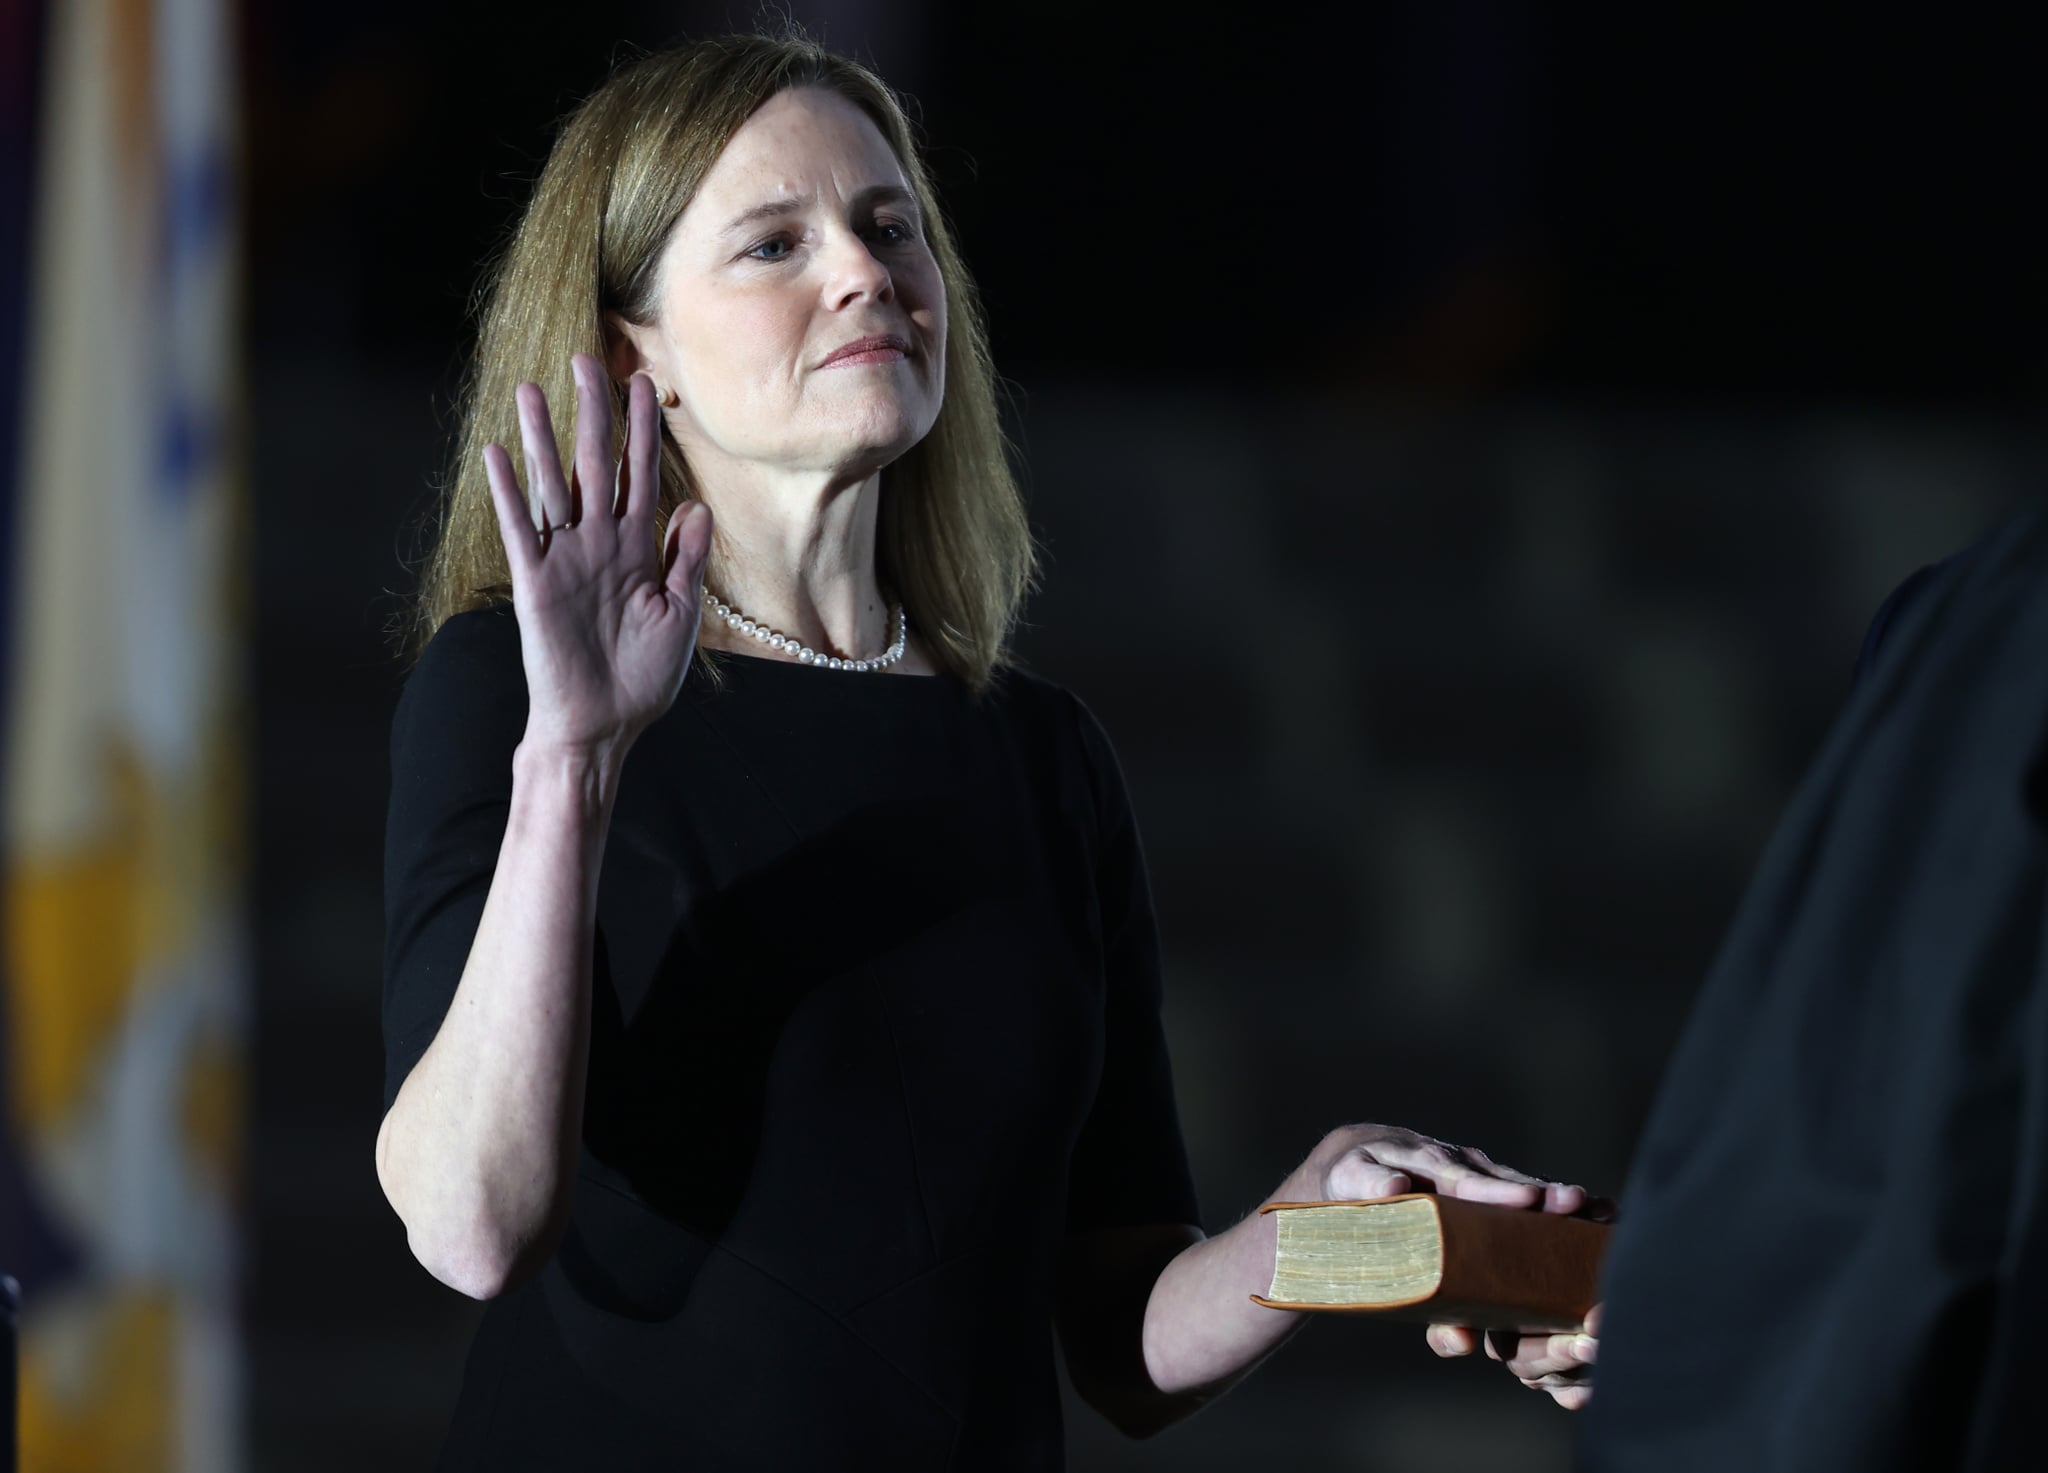 WASHINGTON, DC - OCTOBER 26: U.S. Supreme Court Associate Justice Amy Coney Barrett is sworn in by Supreme Court Associate Justice Clarence Thomas during a ceremonial swearing-in event on the South Lawn of the White House October 26, 2020 in Washington, DC. The Senate confirmed Barrett's nomination to the Supreme Court today by a vote of 52-48. (Photo by Tasos Katopodis/Getty Images)